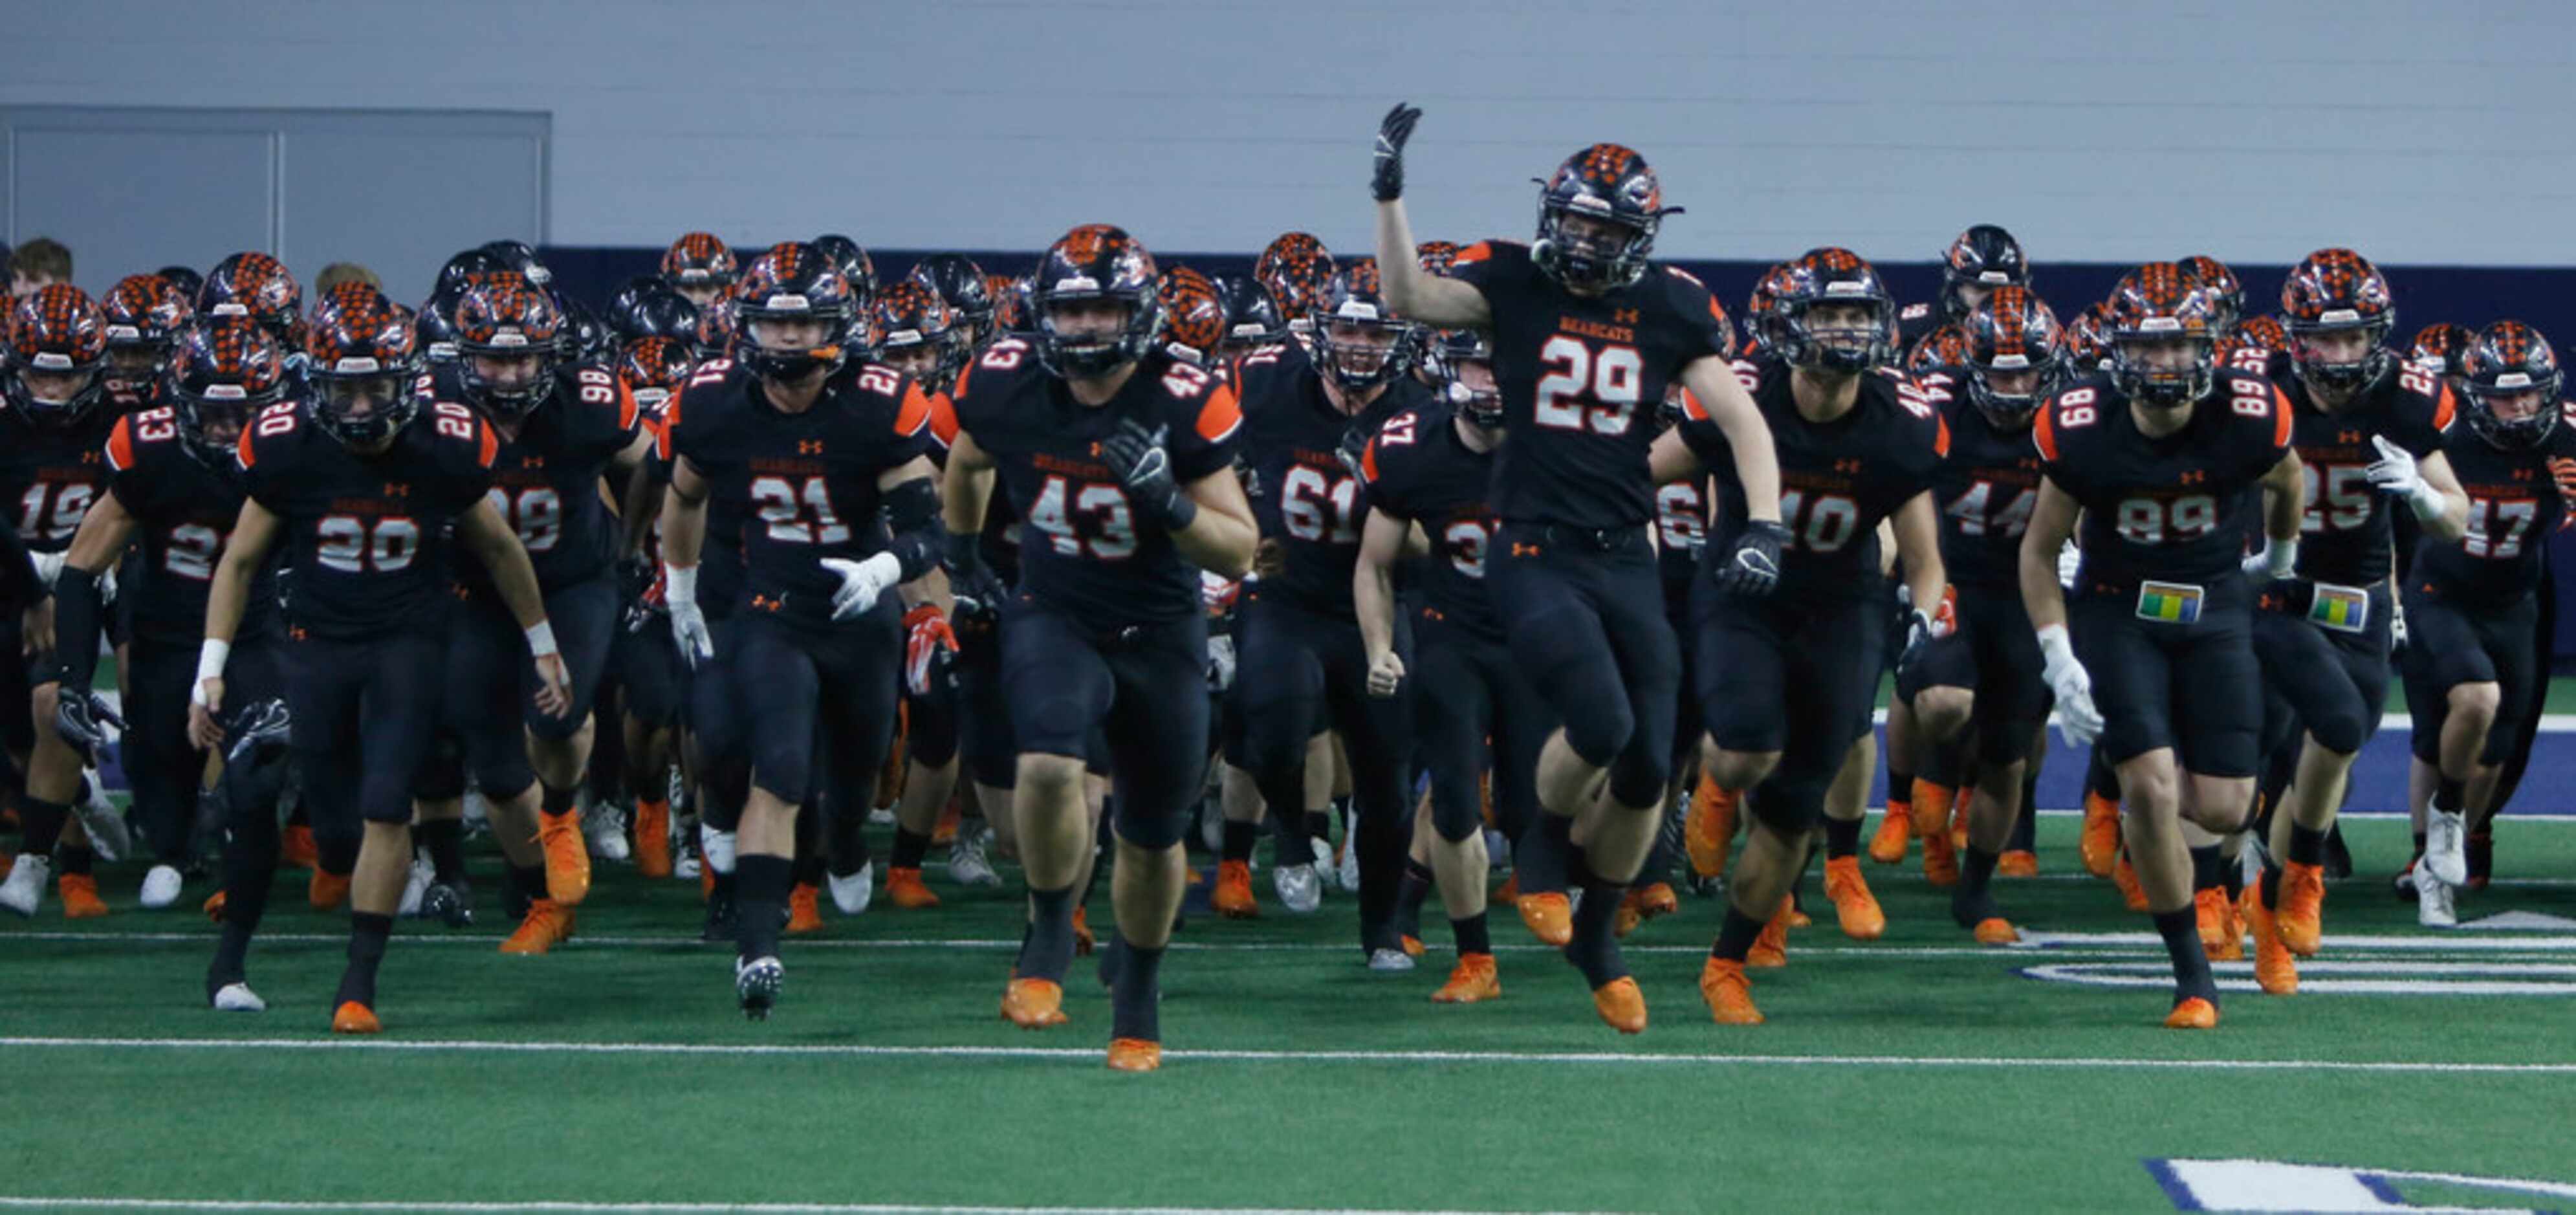 Aledo Bearcats players storm the field just prior to the opening kickoff of their game...